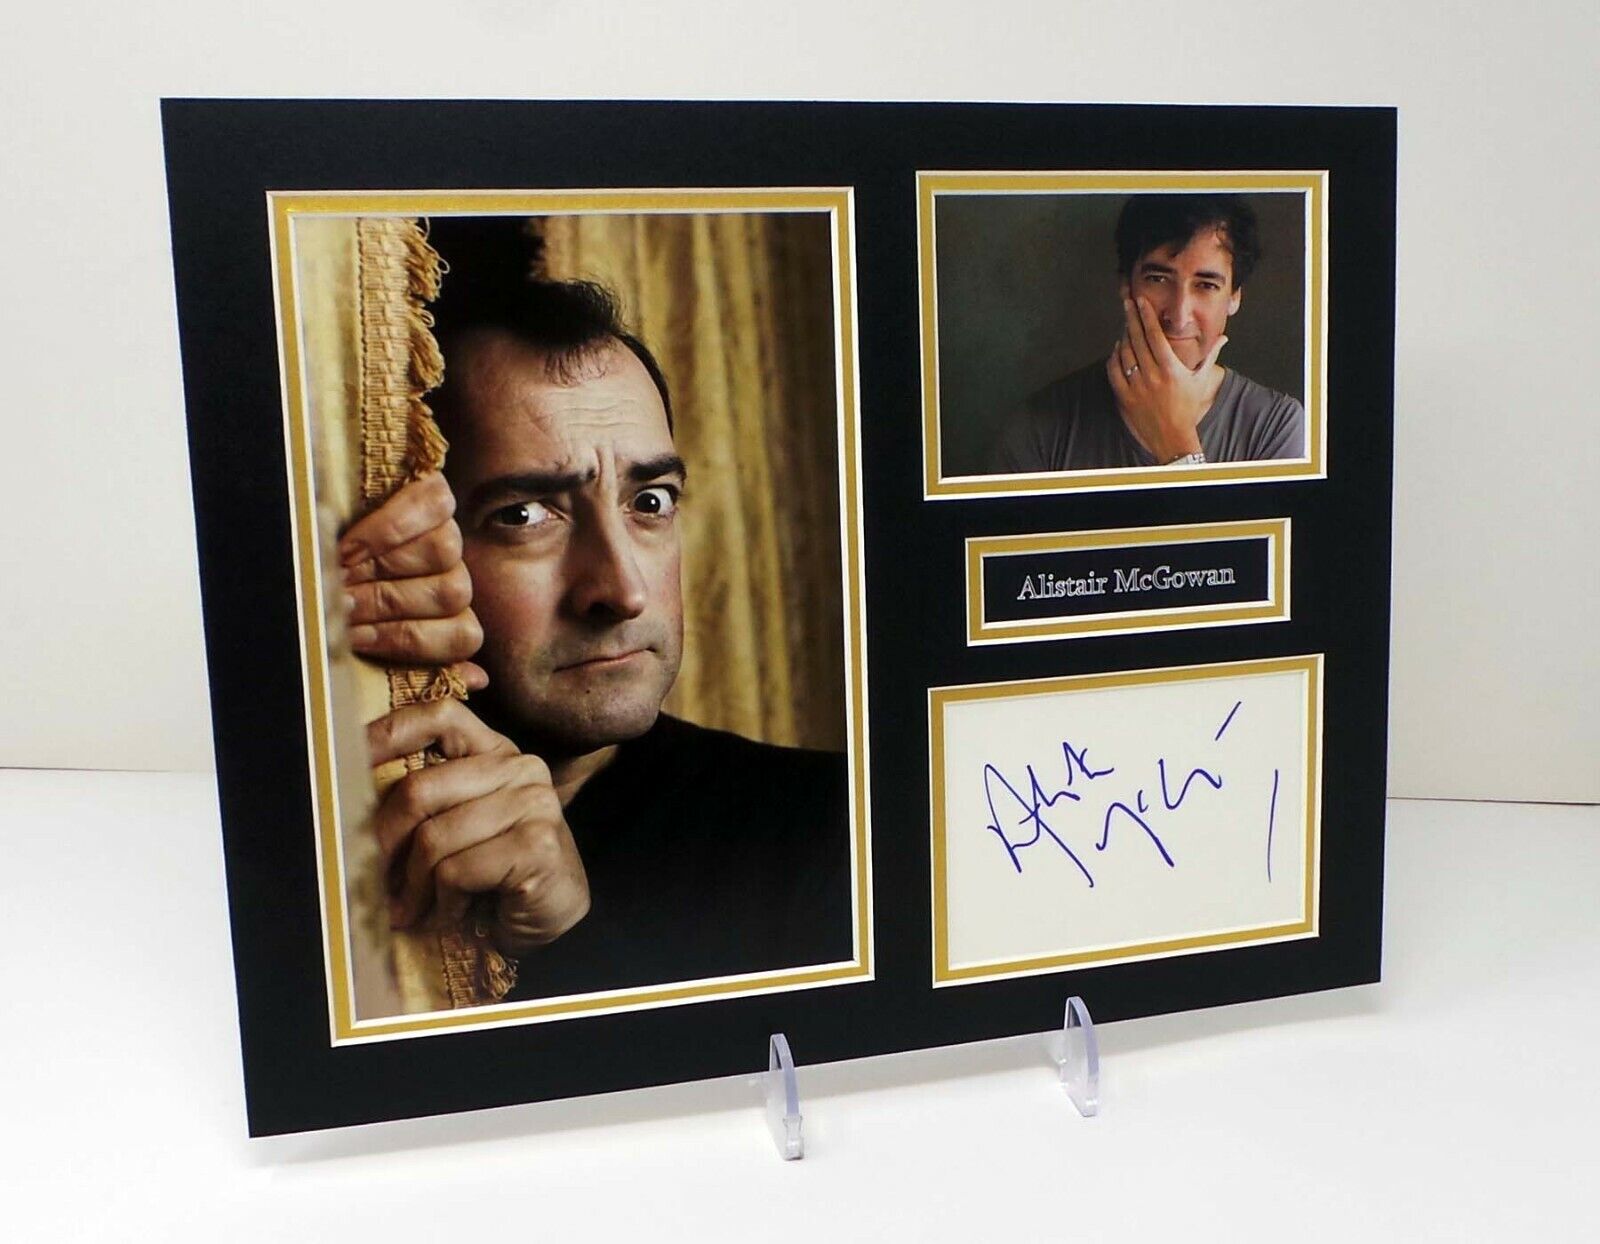 Alistair McGOWAN Signed & Mounted Stand up Comedian Photo Poster painting Display AFTAL RD COA